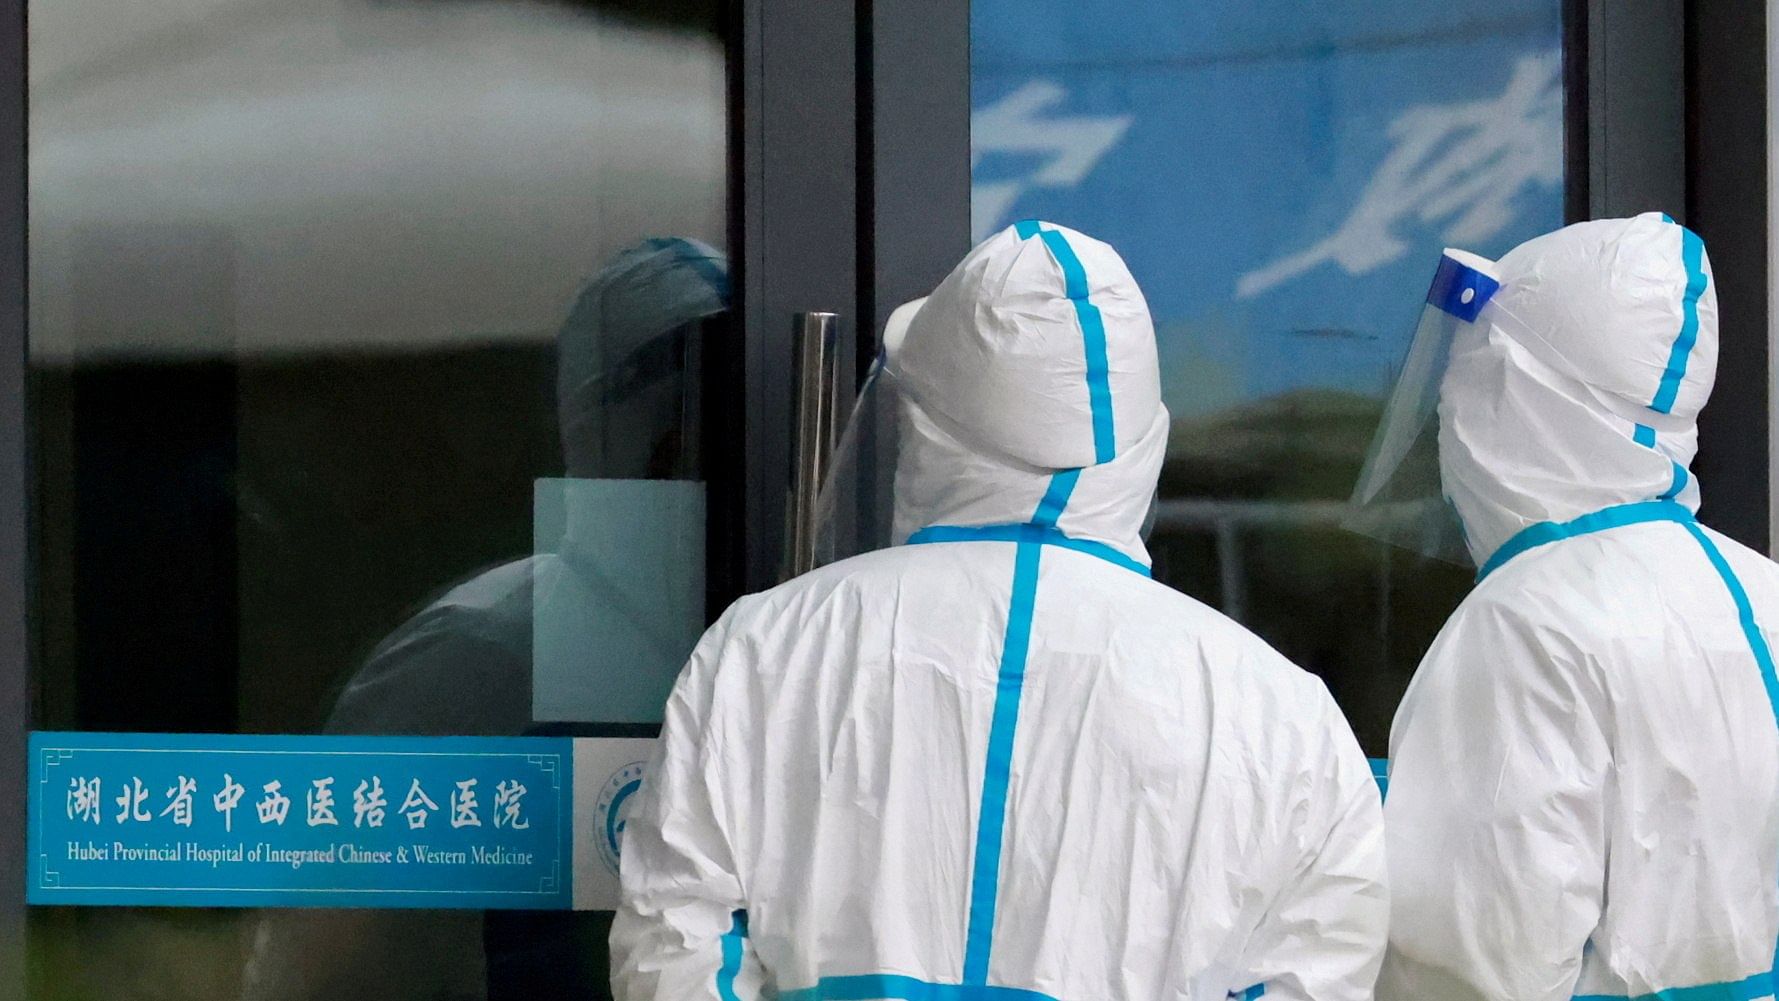 Staff members in protective suits stand at Hubei Provincial Hospital of Integrated Chinese and Western Medicine where members of the World Health Organization (WHO) team tasked with investigating the origins of the coronavirus disease (COVID-19) are visiting, in Wuhan. Credit: reuters File Photo